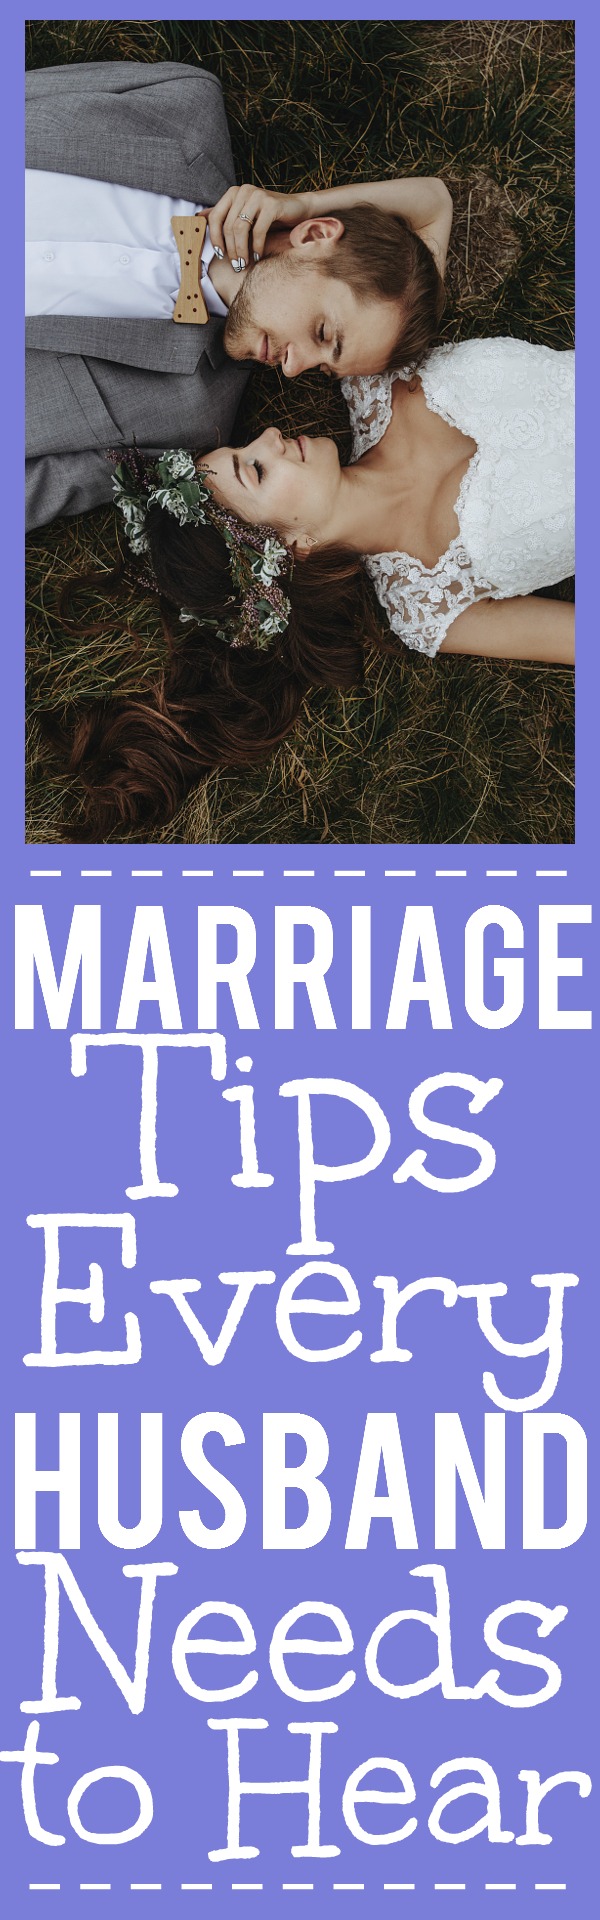 Marriage Tips Every Husband Needs to Hear - Marriage can be hard.  But with love, respect, and hard work, you can have a wonderful, happy marriage. Get started with these 7 Marriage Tips Every Husband Needs to Hear.